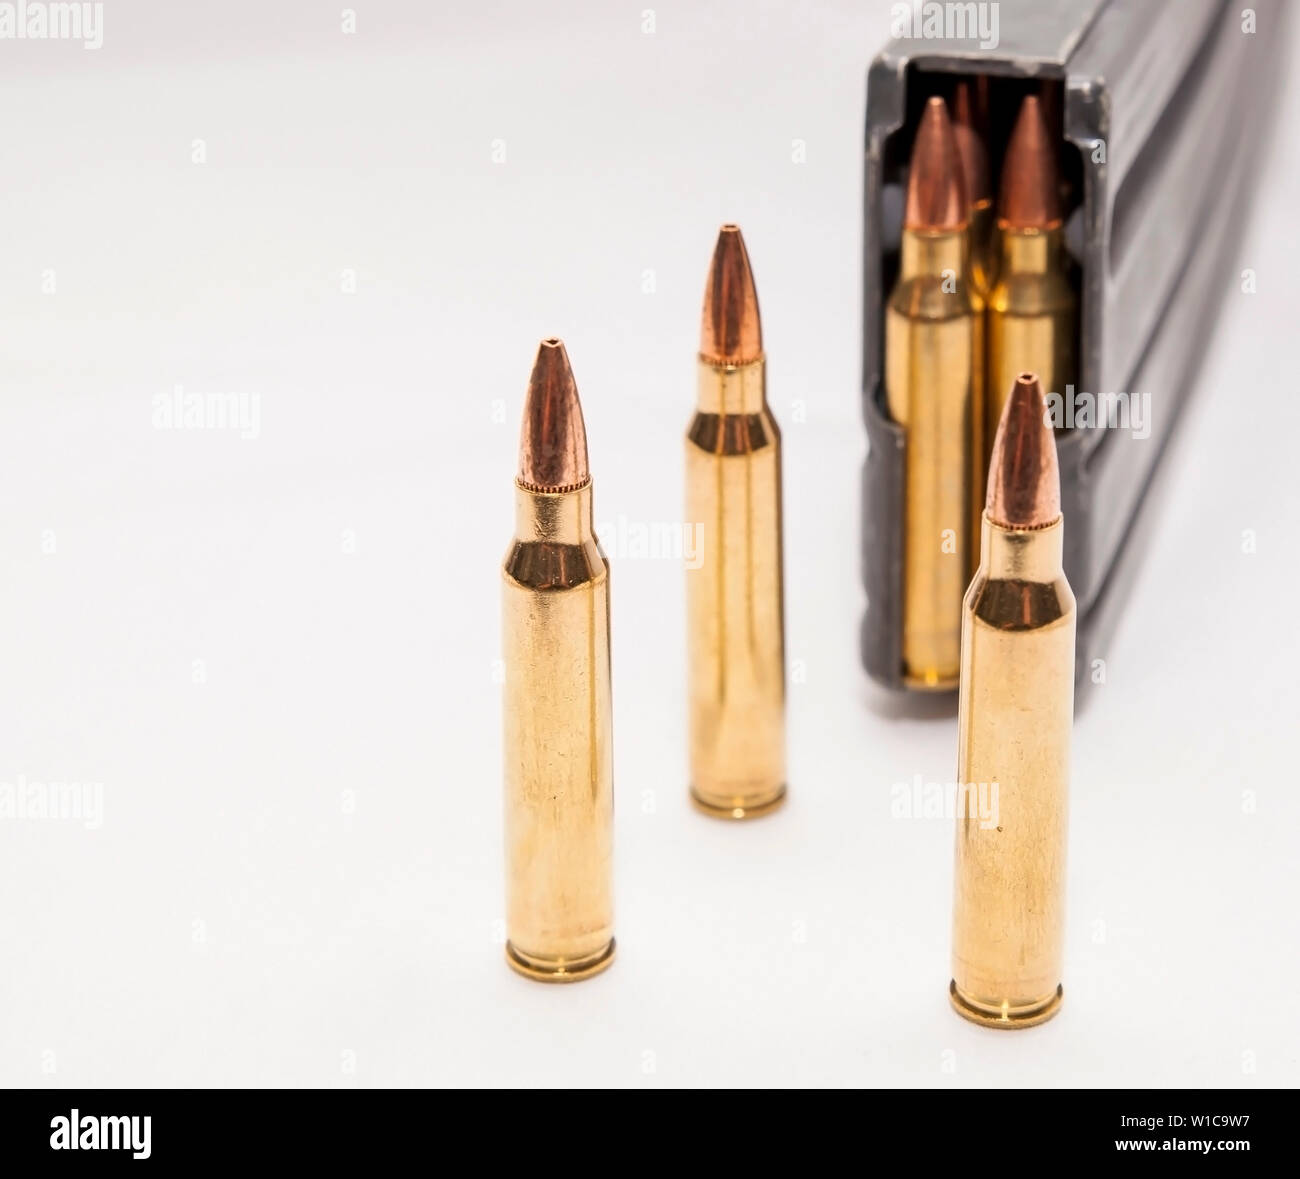 223 caliber bullets along with a loaded 223 caliber rifle magazine on a white background Stock Photo